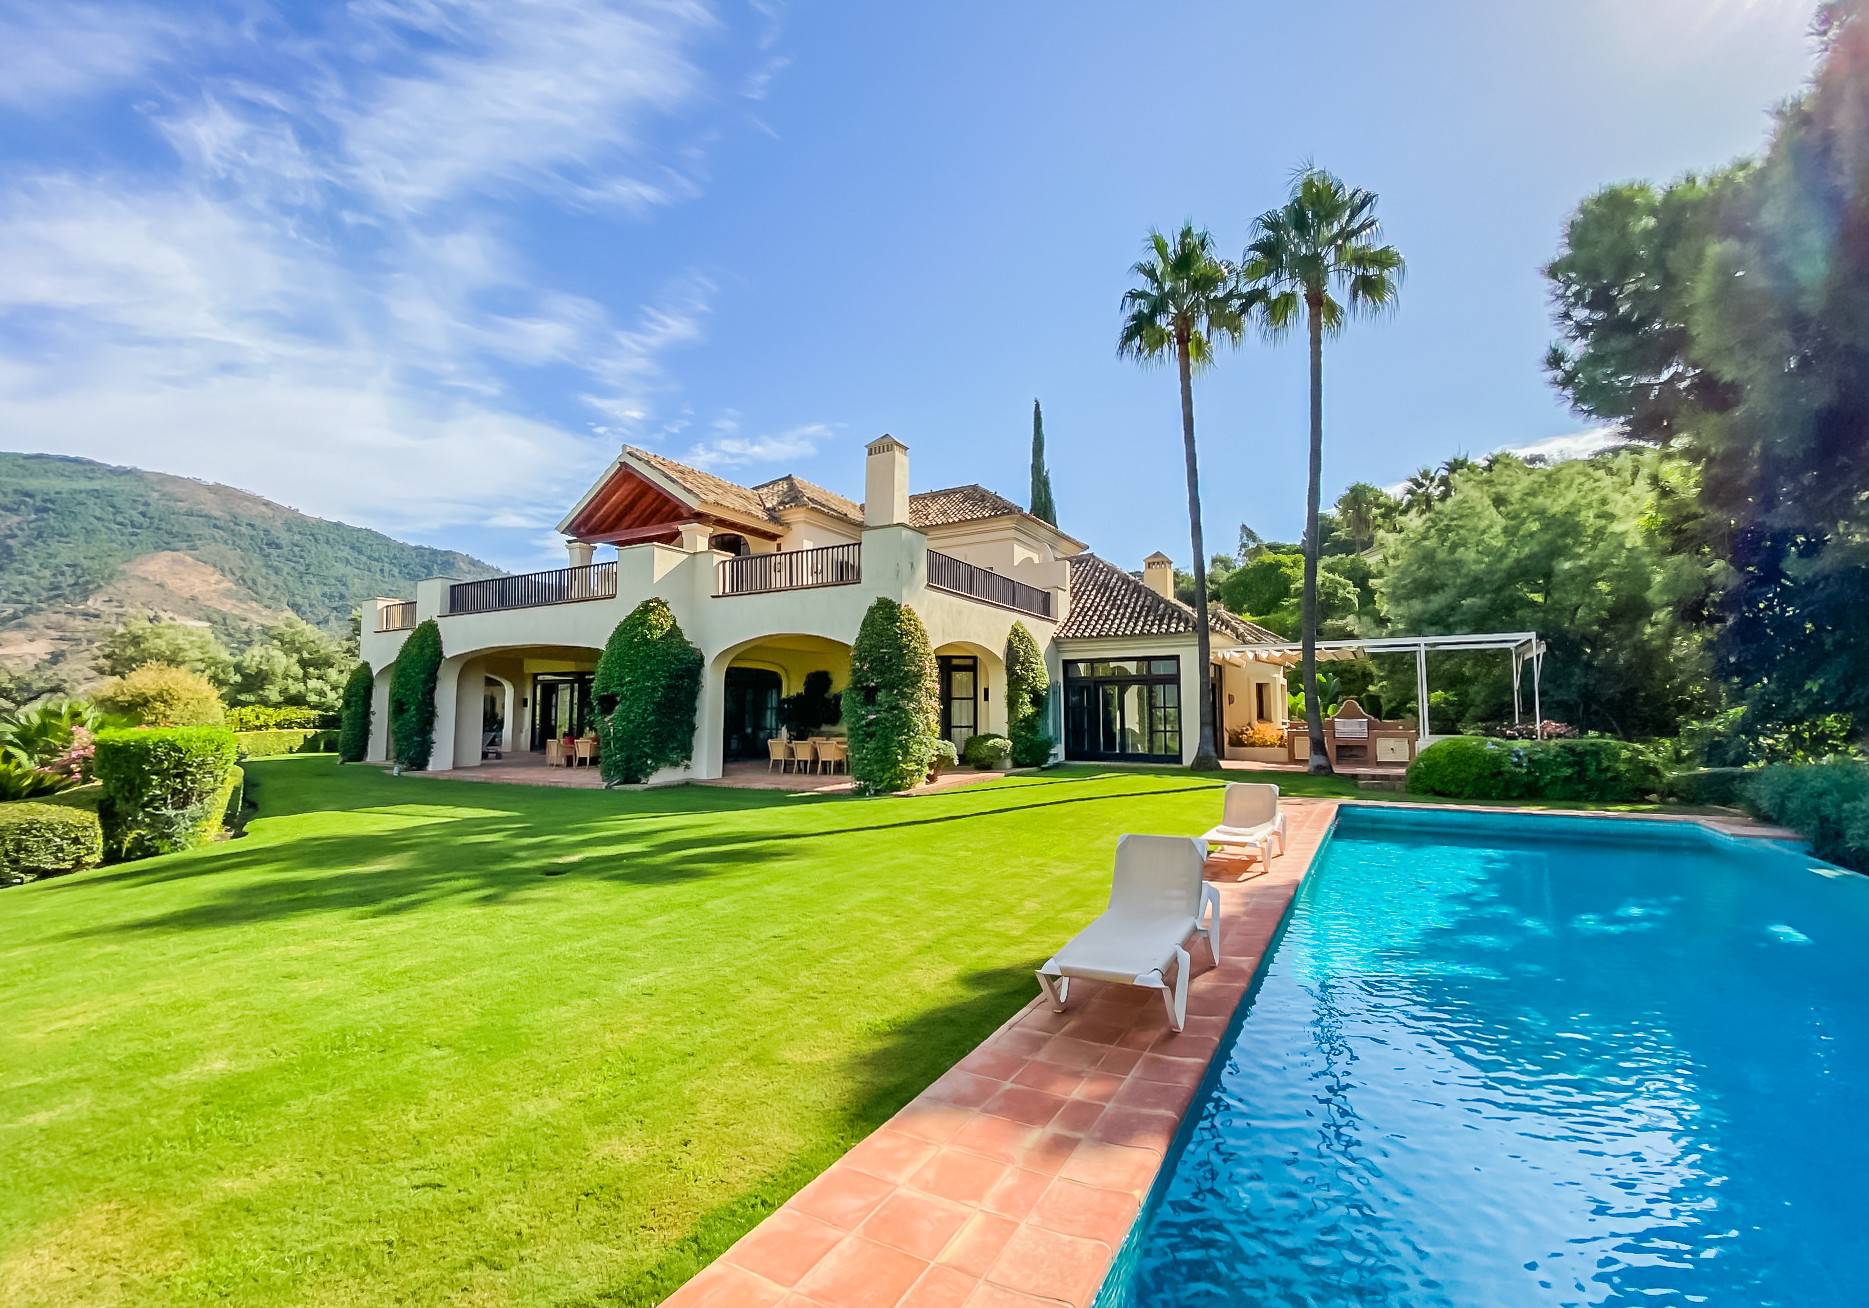 This high end grand villa for sale in ritzy Zagaleta offers the best in terms of qualities and features, and guarantees luxurious living in harmony with stunning nature.